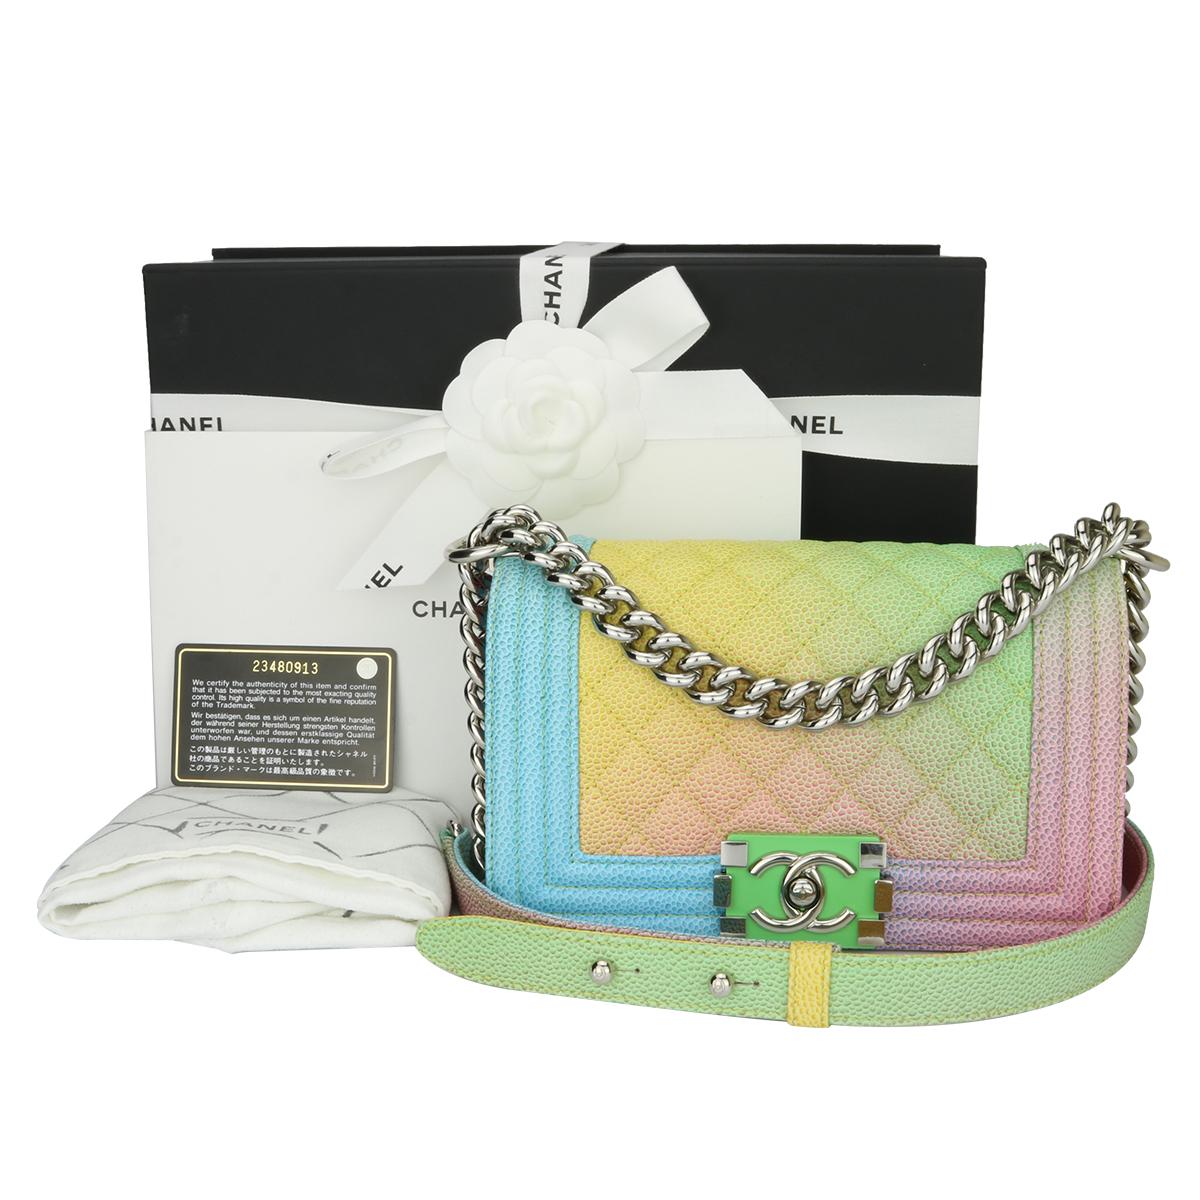 Authentic CHANEL Small Boy Rainbow Cuba Caviar with Shiny Silver Hardware 2017.

This stunning bag is still in a mint condition, the bag still holds its original shape and the hardware is still very clean and shiny.

Exterior Condition: Mint